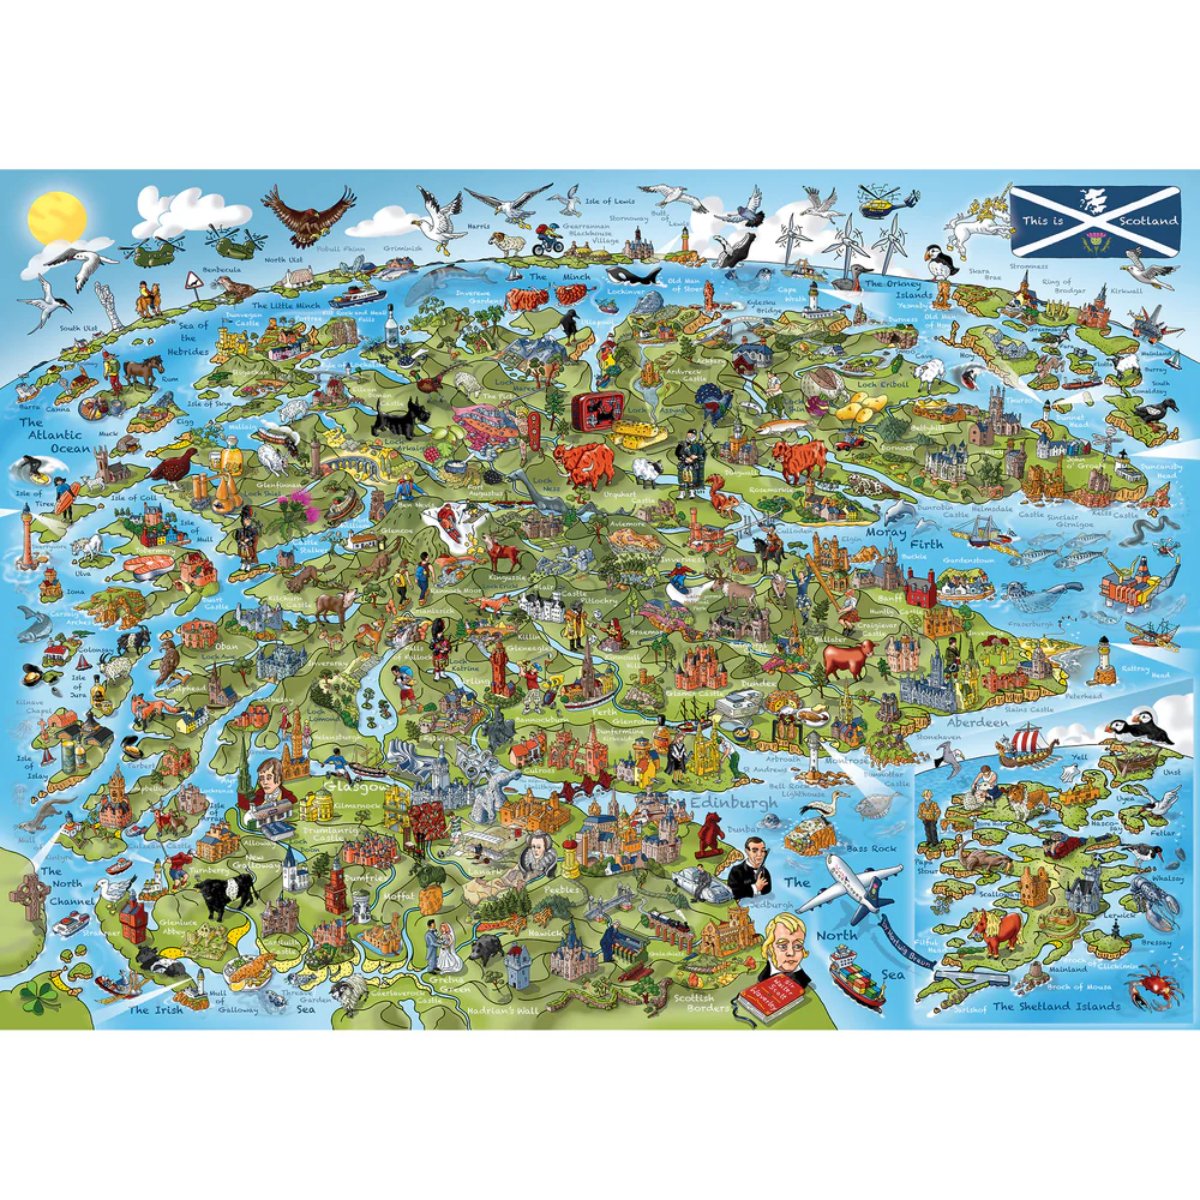 This Is Scotland - Gibsons 1000 Piece Jigsaw Puzzle - Phillips Hobbies